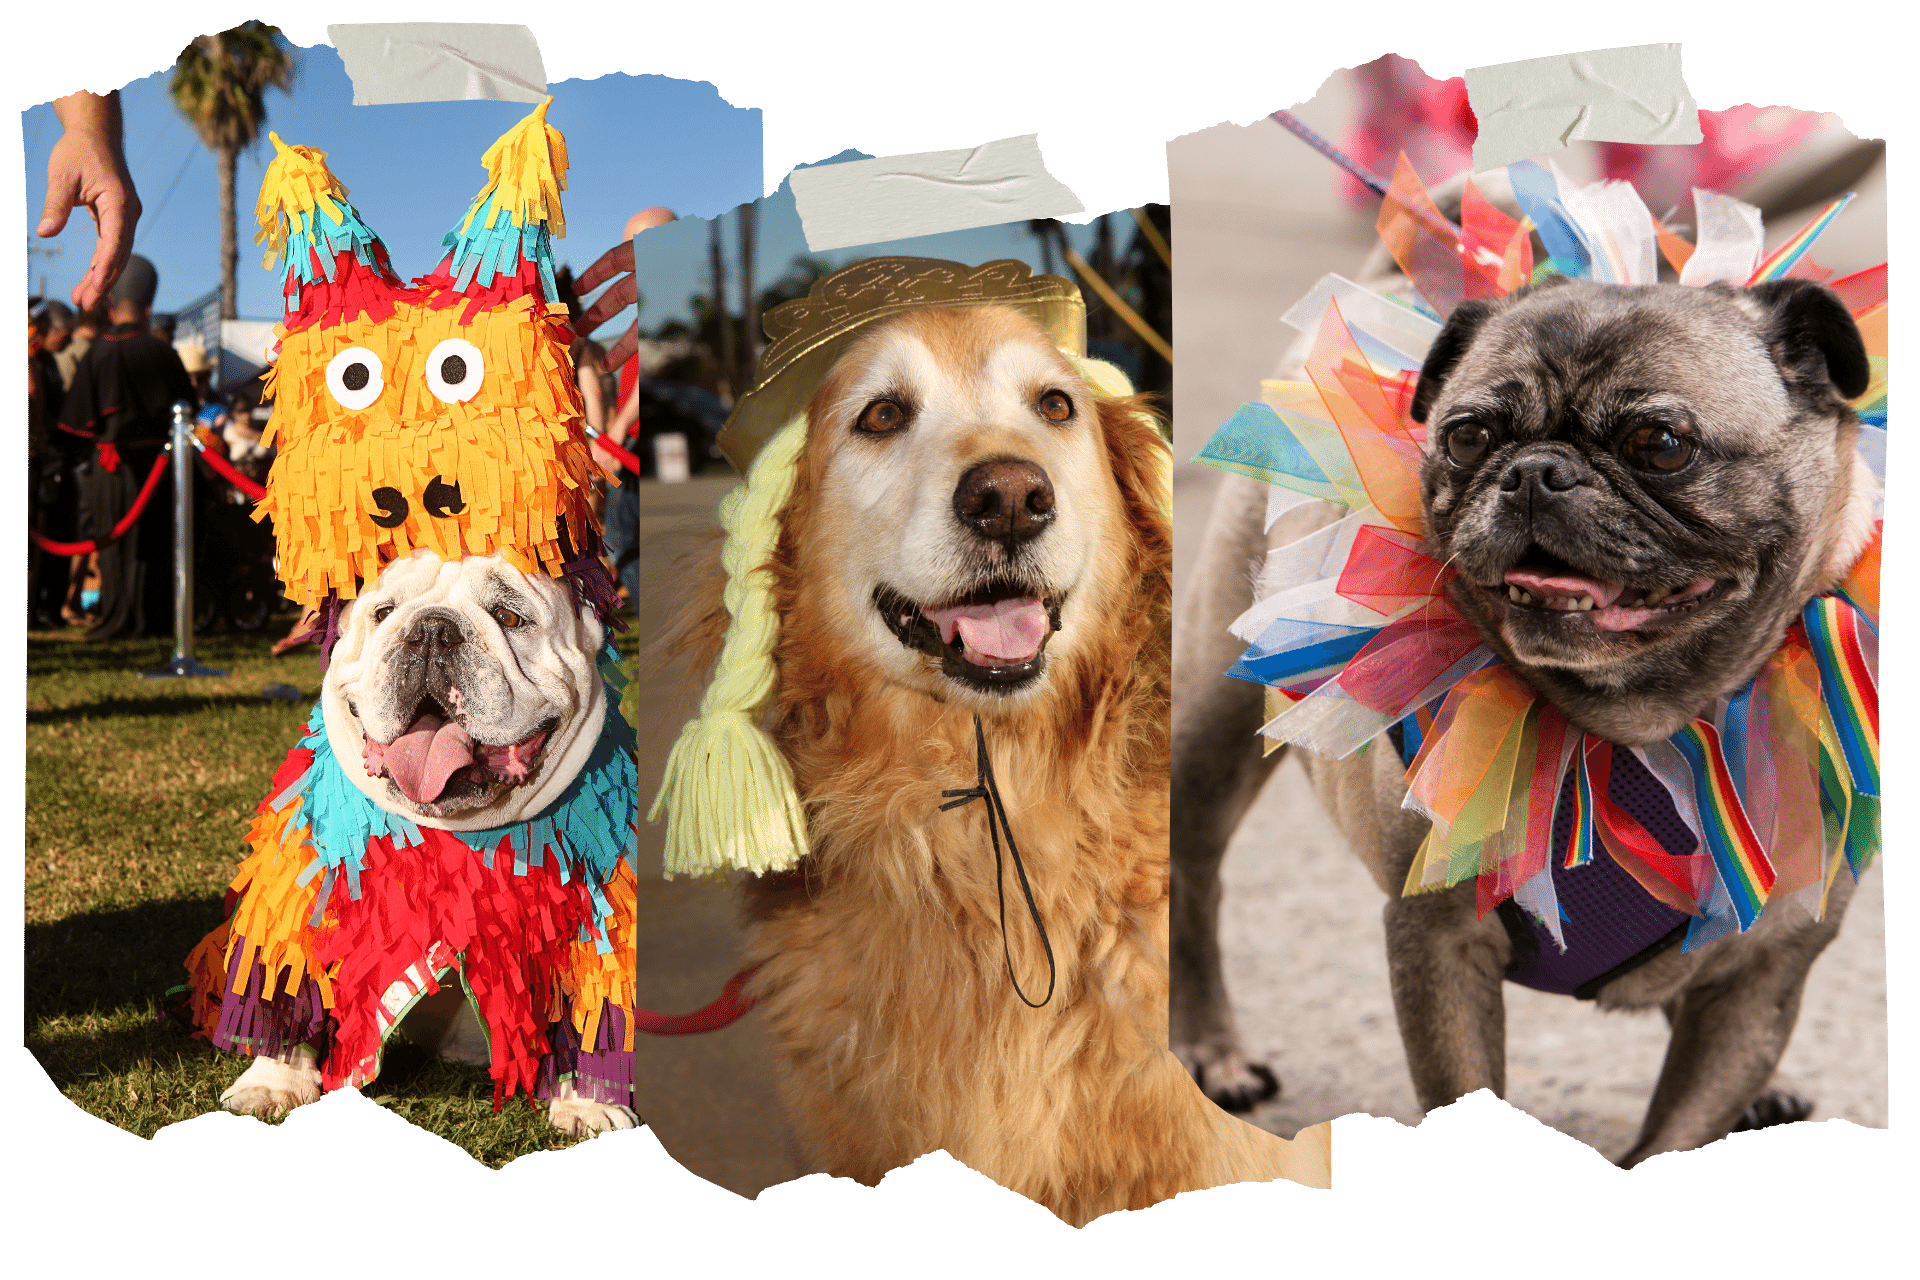 The Tompkins Park Dog Halloween Parade is one of New York's best Halloween events